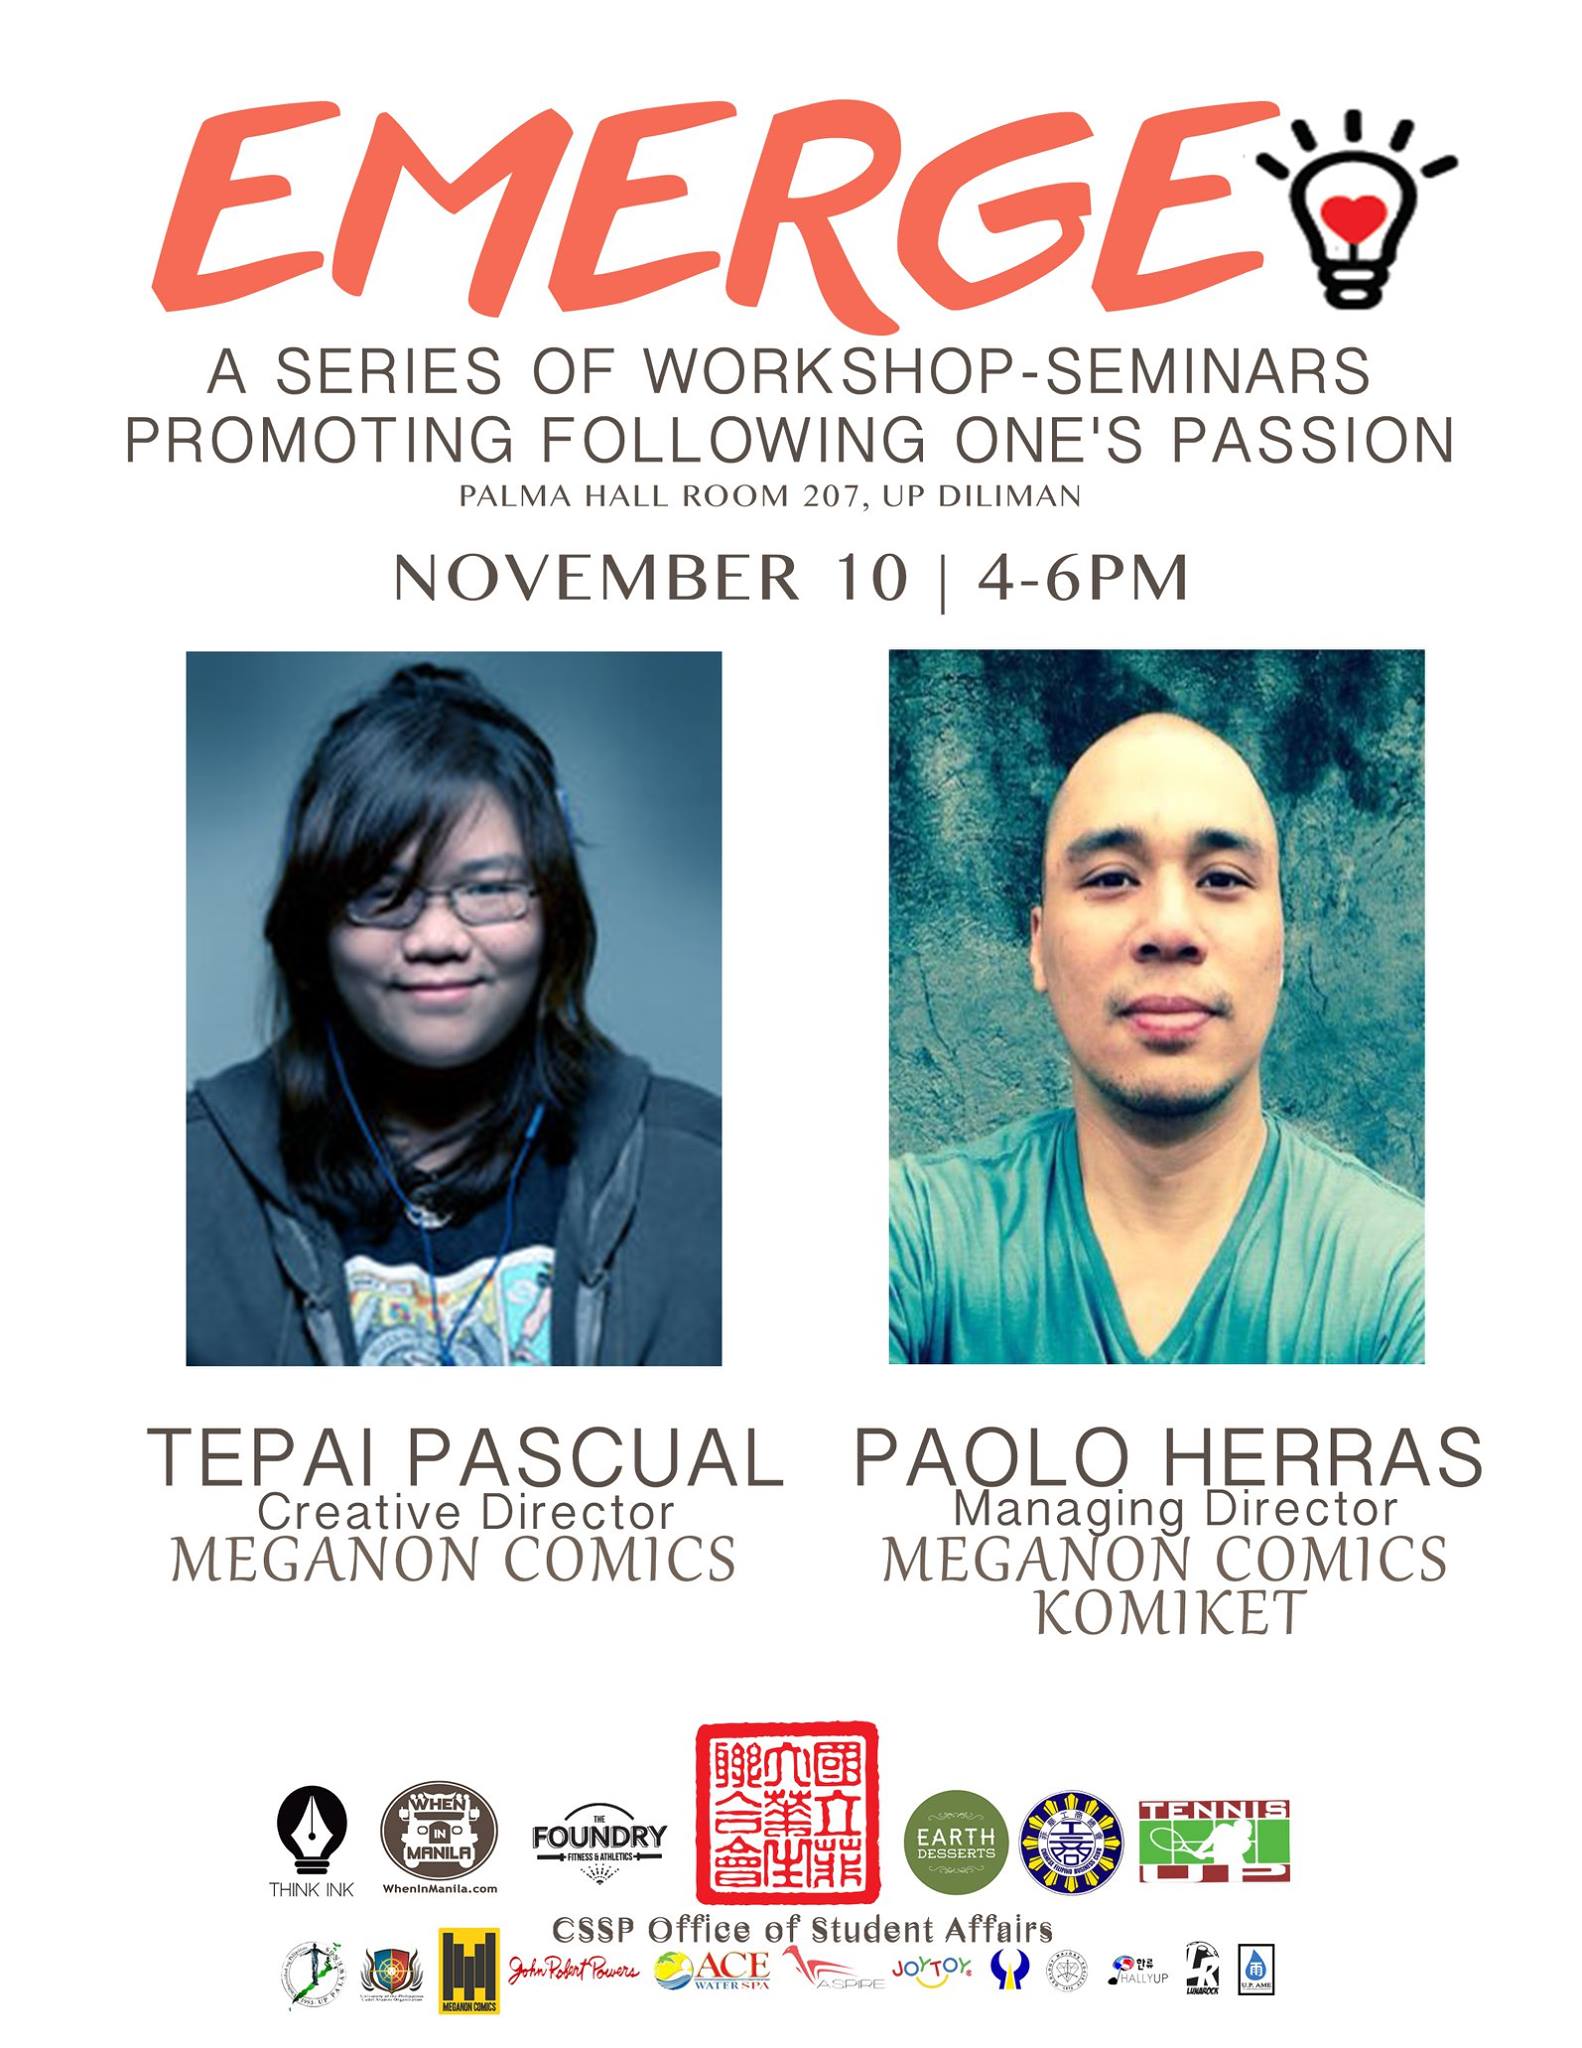 Tuesday, November 10 UP Chinese Student Association Tepai Pascual is the Creative Director of Meganon Comics Publishing House. She is a nominee for the 2015 National Book Awards for her graphic novel, "Maktan1521," which is also her thesis at the UP Fine Arts. Tepai also co-organizes the Filipino Komiks Market (Komiket) and her other books are, "Alamat Ng Matibay," "Mark 9Verse47", "Noodle Boy" and "Buhay Habangbuhay". Paolo Herras is the Managing Director of Meganon Comics Publishing House and the Filipino Komiks Market (Komiket). He is the author of "Alamat Ng Matibay," "Noodle Boy," "Strange Natives," "Sumpa" and "Buhay Habangbuhay," which he is currently directing the film adaptation as part of the 2nd CineFilipino Film Festival in 2016. After over five years of exhibiting at national komiks events, MEGANON COMICS took a leap of faith and bridged their indie comics to more readers. MC exhibited at several literary and arts events, such as the Manila International Book Fair, the Sikat Pinoy National Art Fair, and the Fringe Manila World Art Festival. To help grow the comics community, MC co-created the Filipino Komiks Market (Komiket), and nurtured new creators through the Comic Book Creator's Workshop.